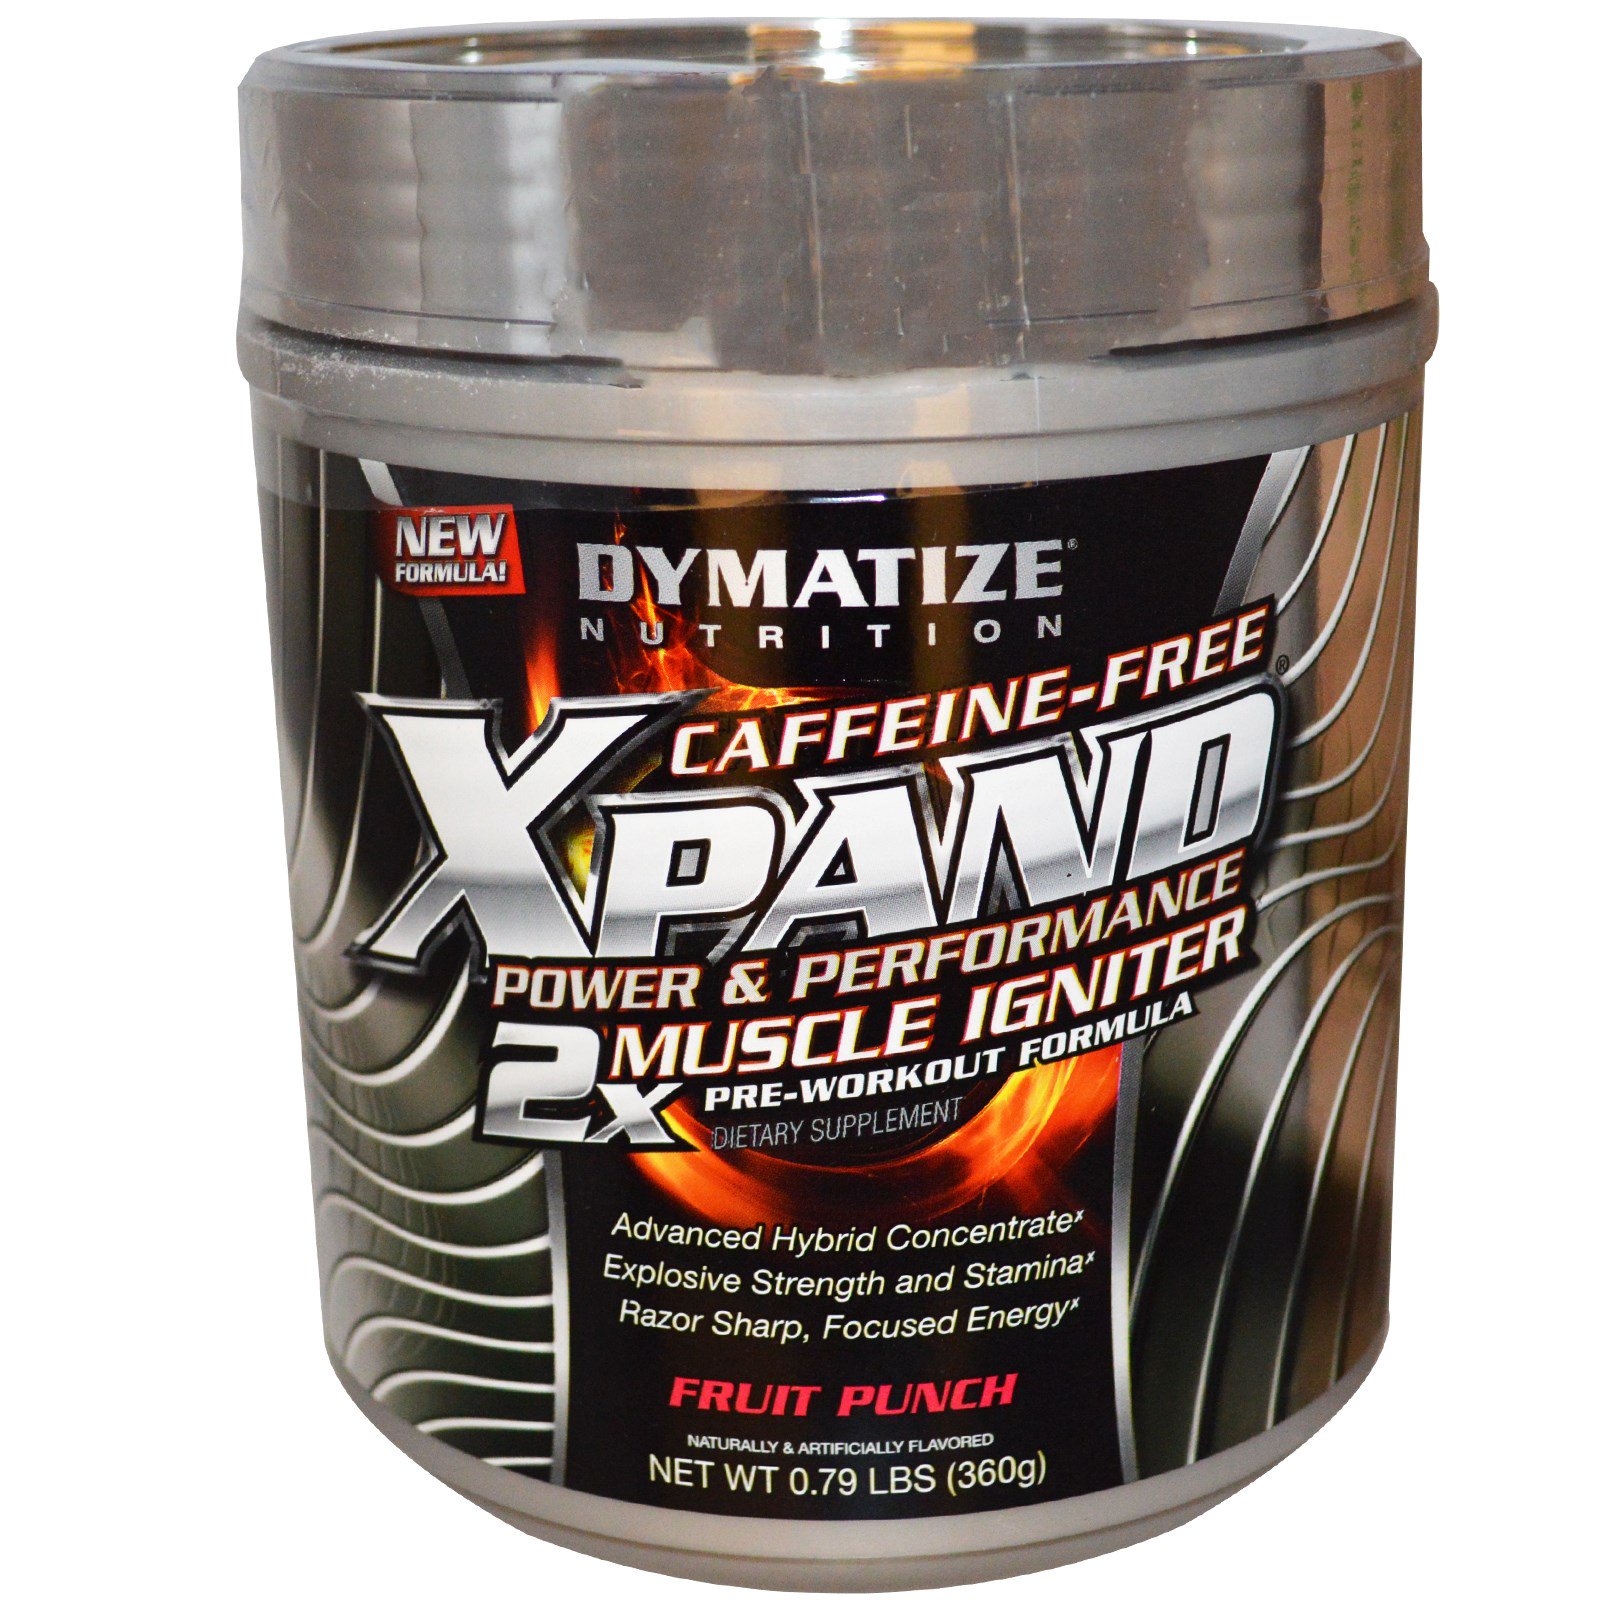 15 Minute Xpand pre workout for Women